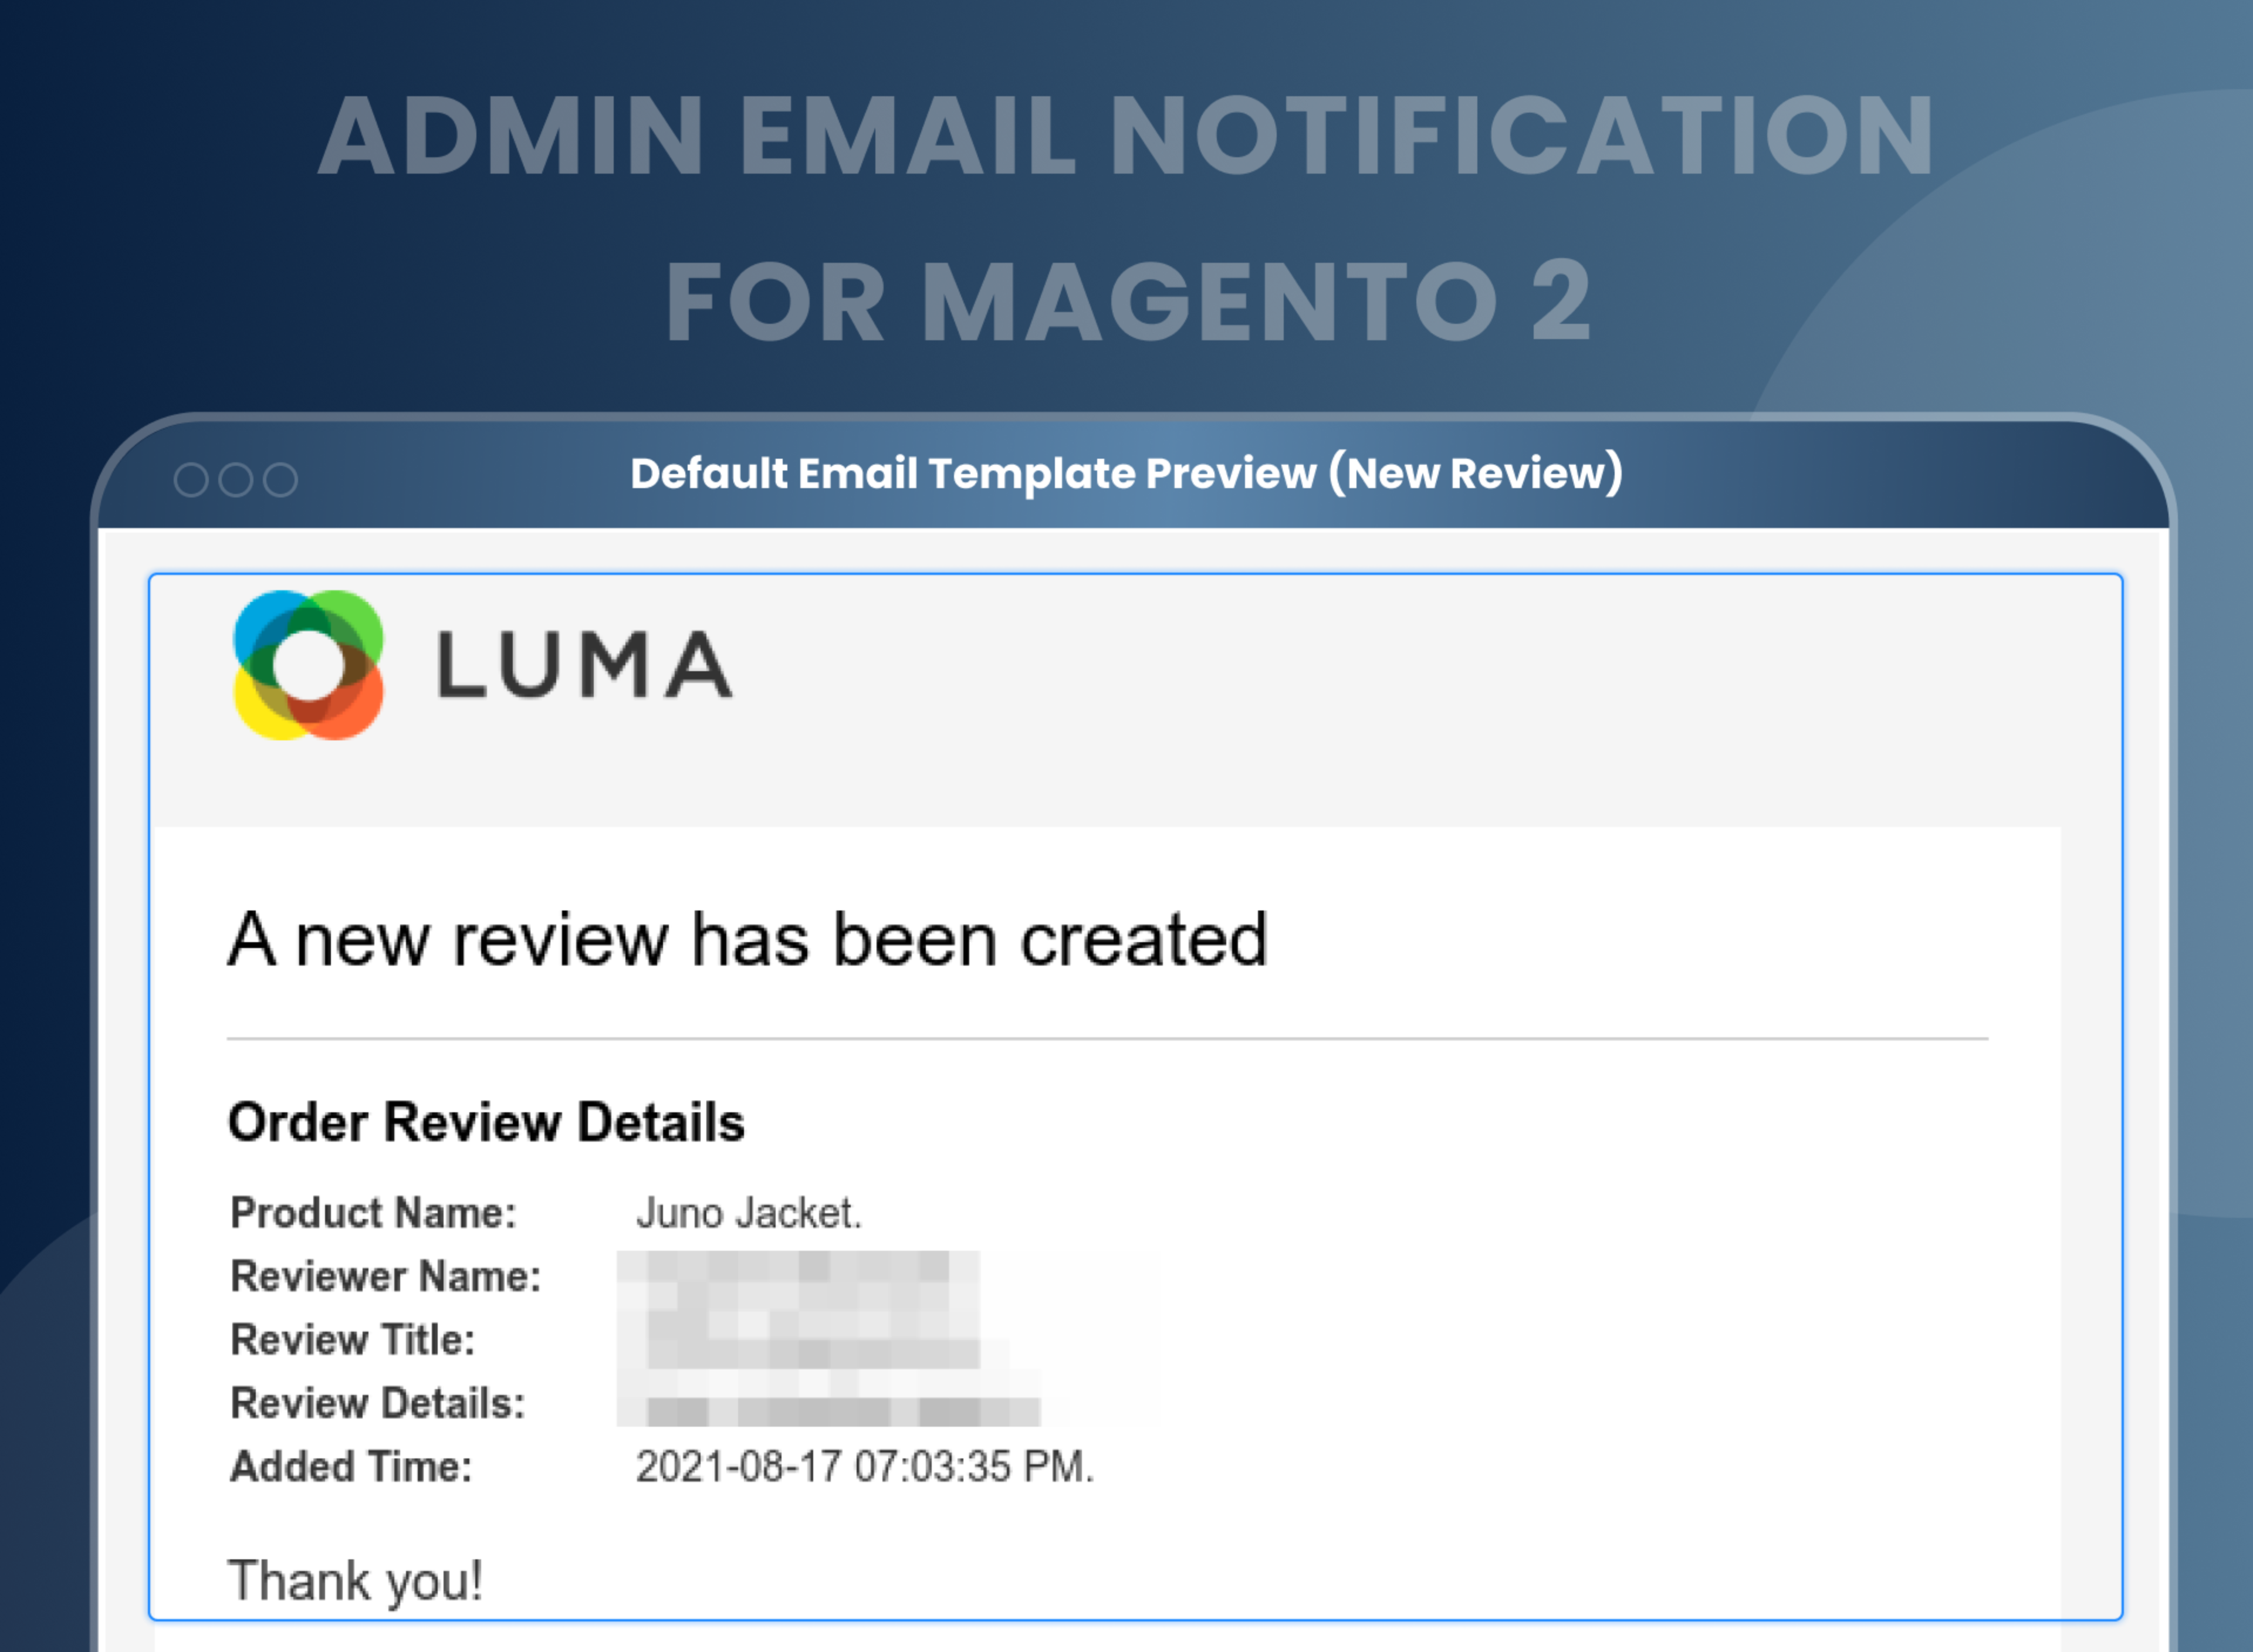 Default Email Template Preview (New Review)